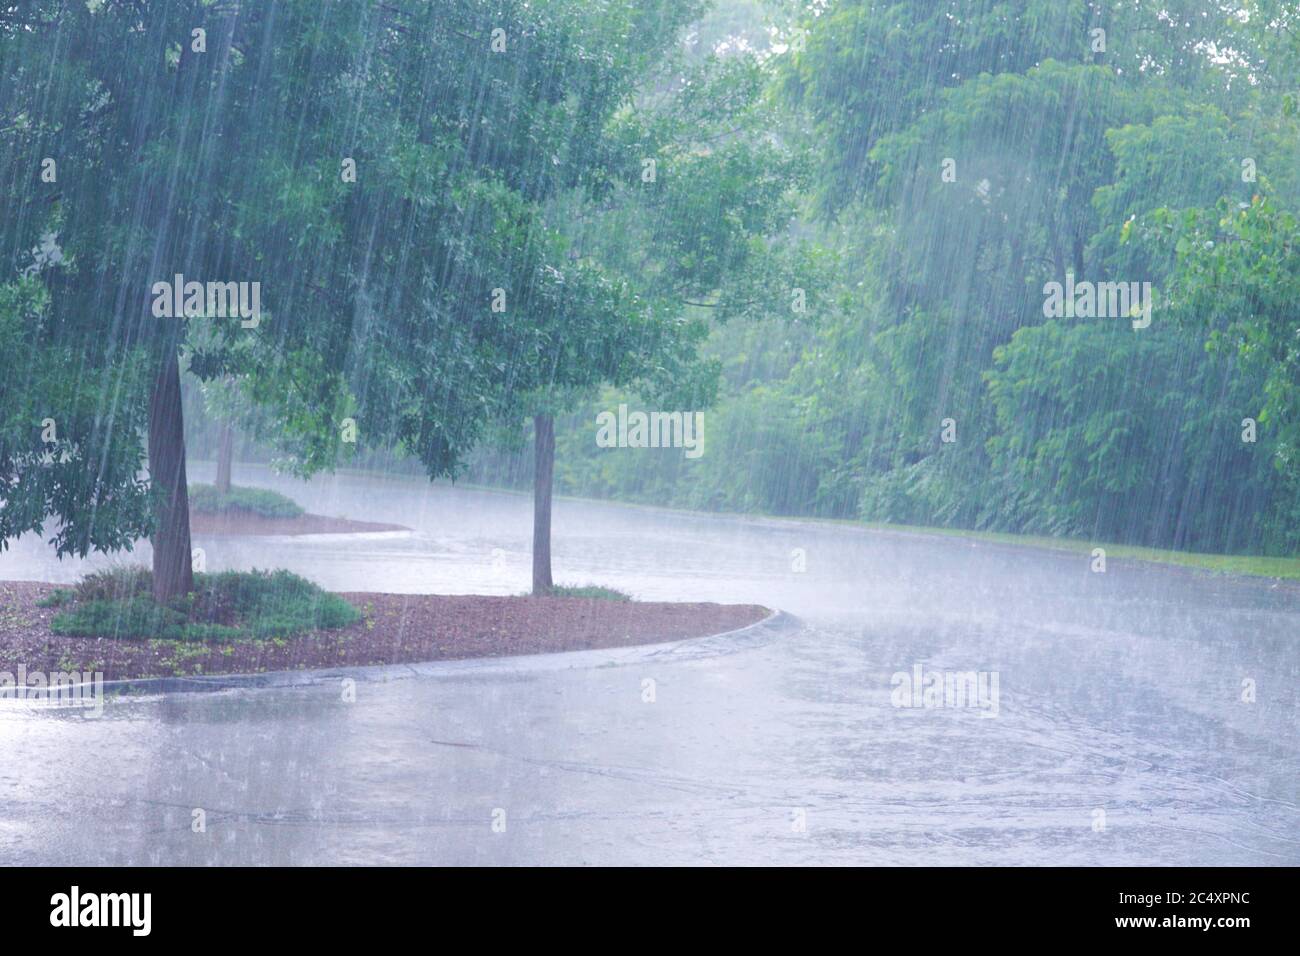 trees and heavy rain outdoor in summer thunderstorm Stock Photo